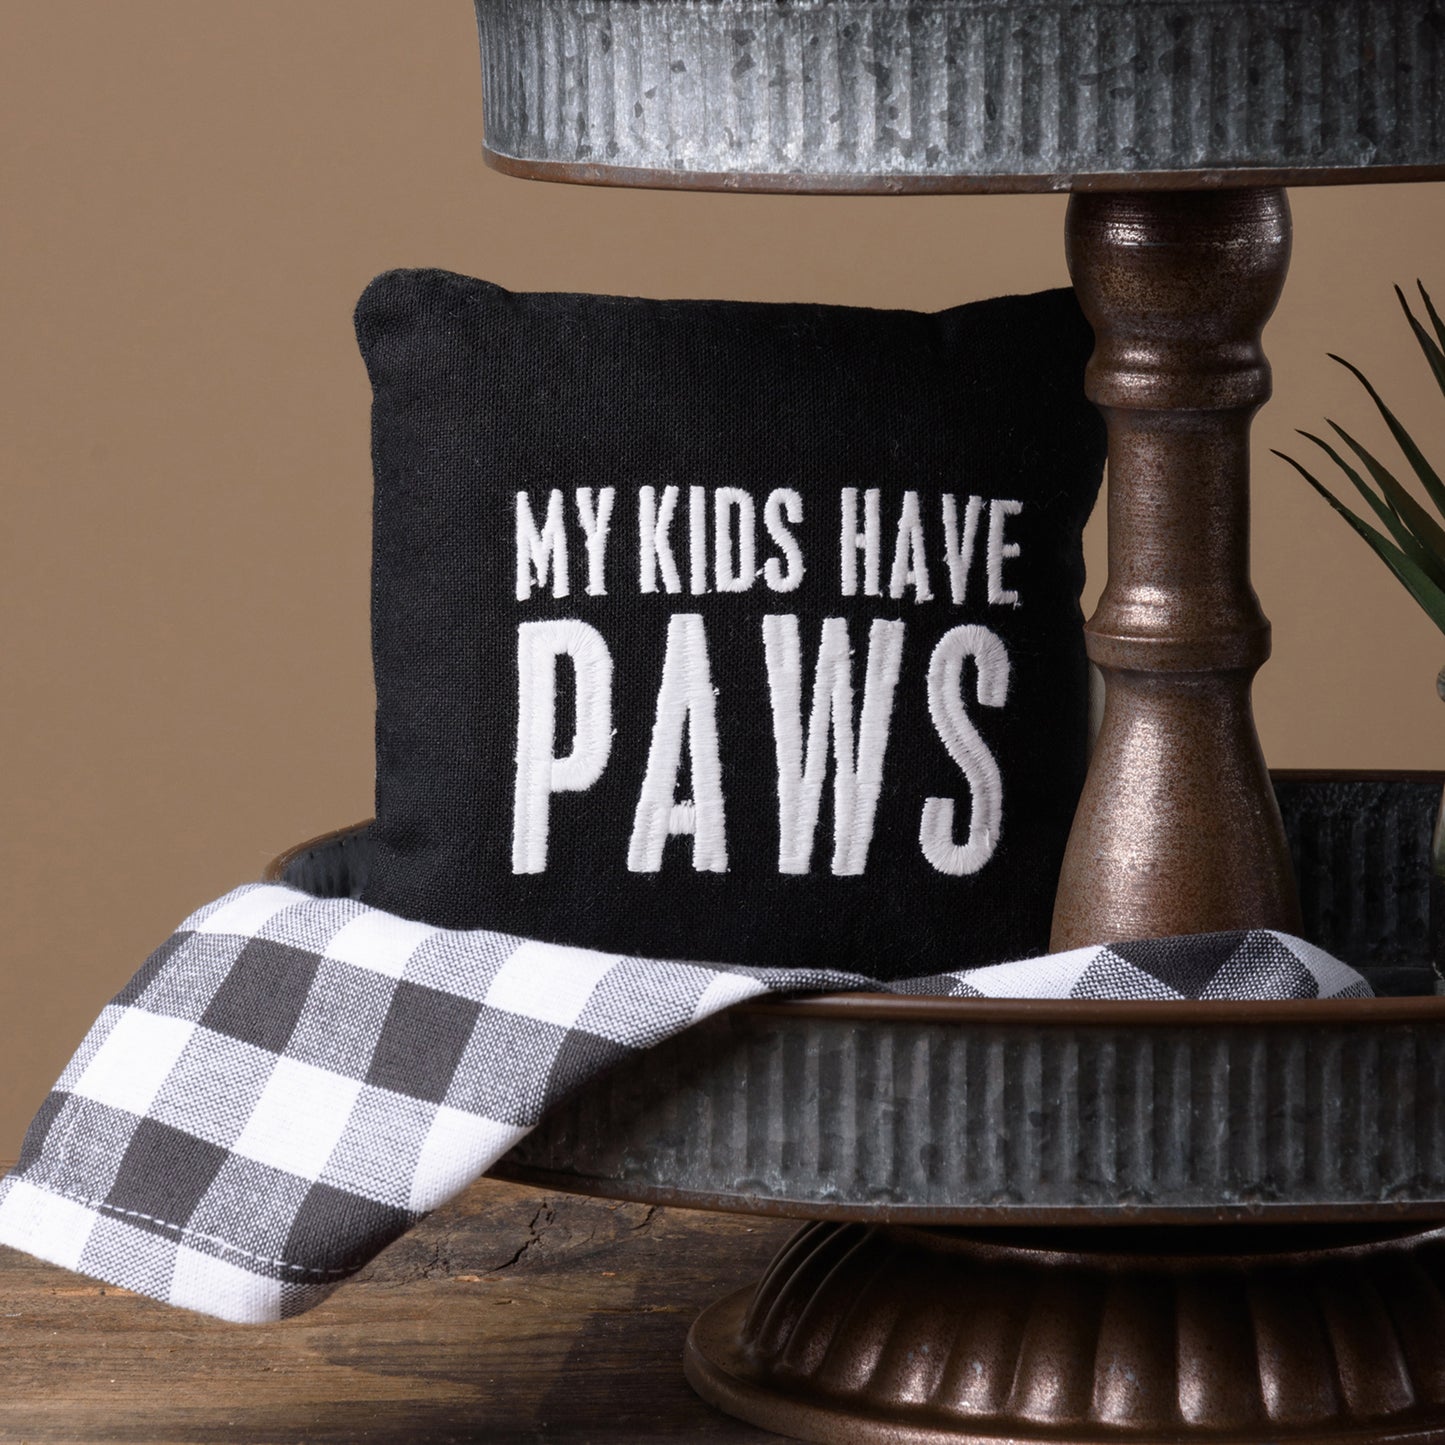 a small black and white pillow that says my kids have paws sits on the bottom tray of a tiered stand, with a gray and white check towel under the pillow